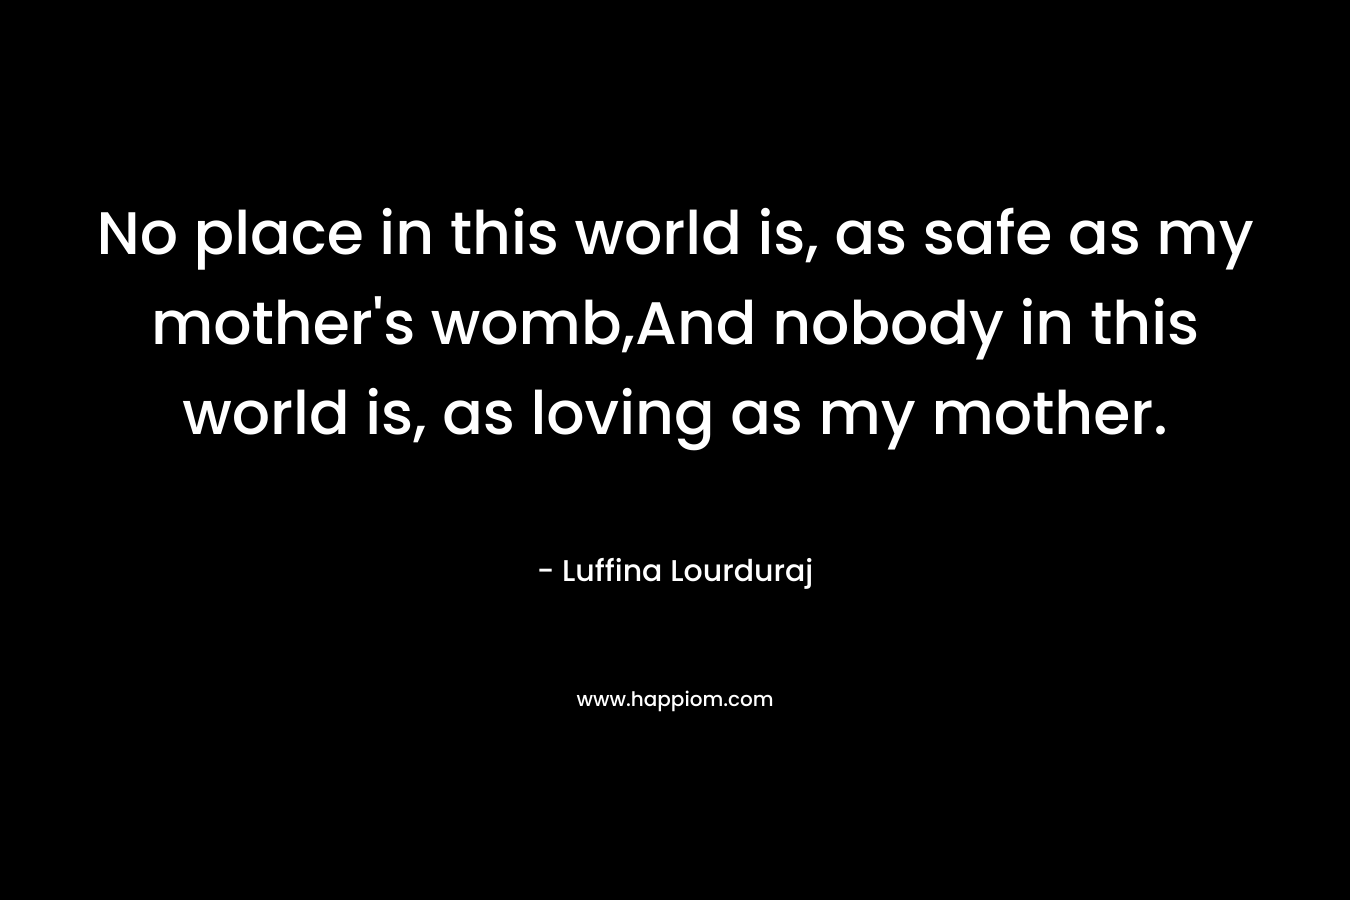 No place in this world is, as safe as my mother’s womb,And nobody in this world is, as loving as my mother. – Luffina Lourduraj